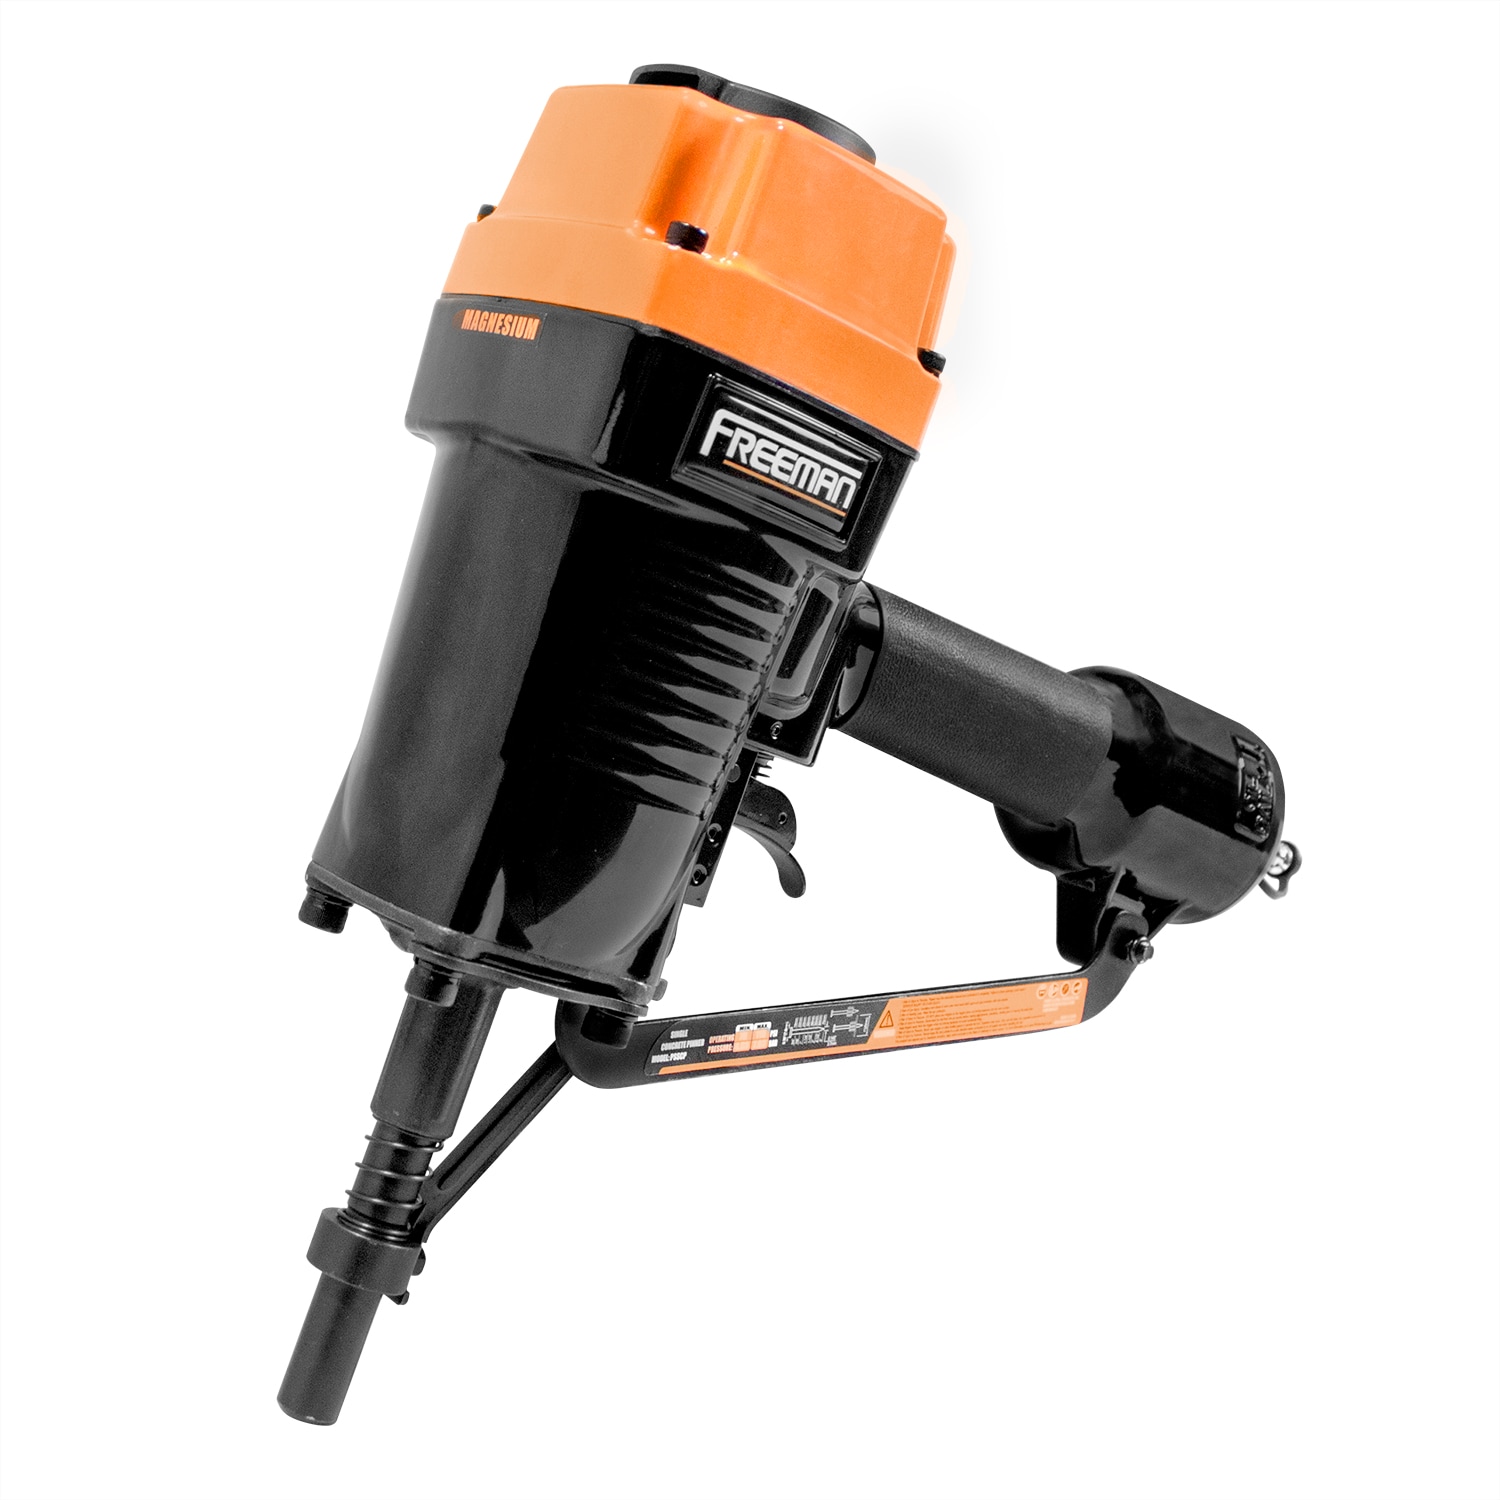 VEVOR Pneumatic Concrete Nailer, 14 Gauge 1 to 2-1/2 inch Heavy Duty T Nail  Gun W/ Ergonomic Handle, Framing Nailer Used in Woodworking, and Upholstery  Carpentry - Walmart.com